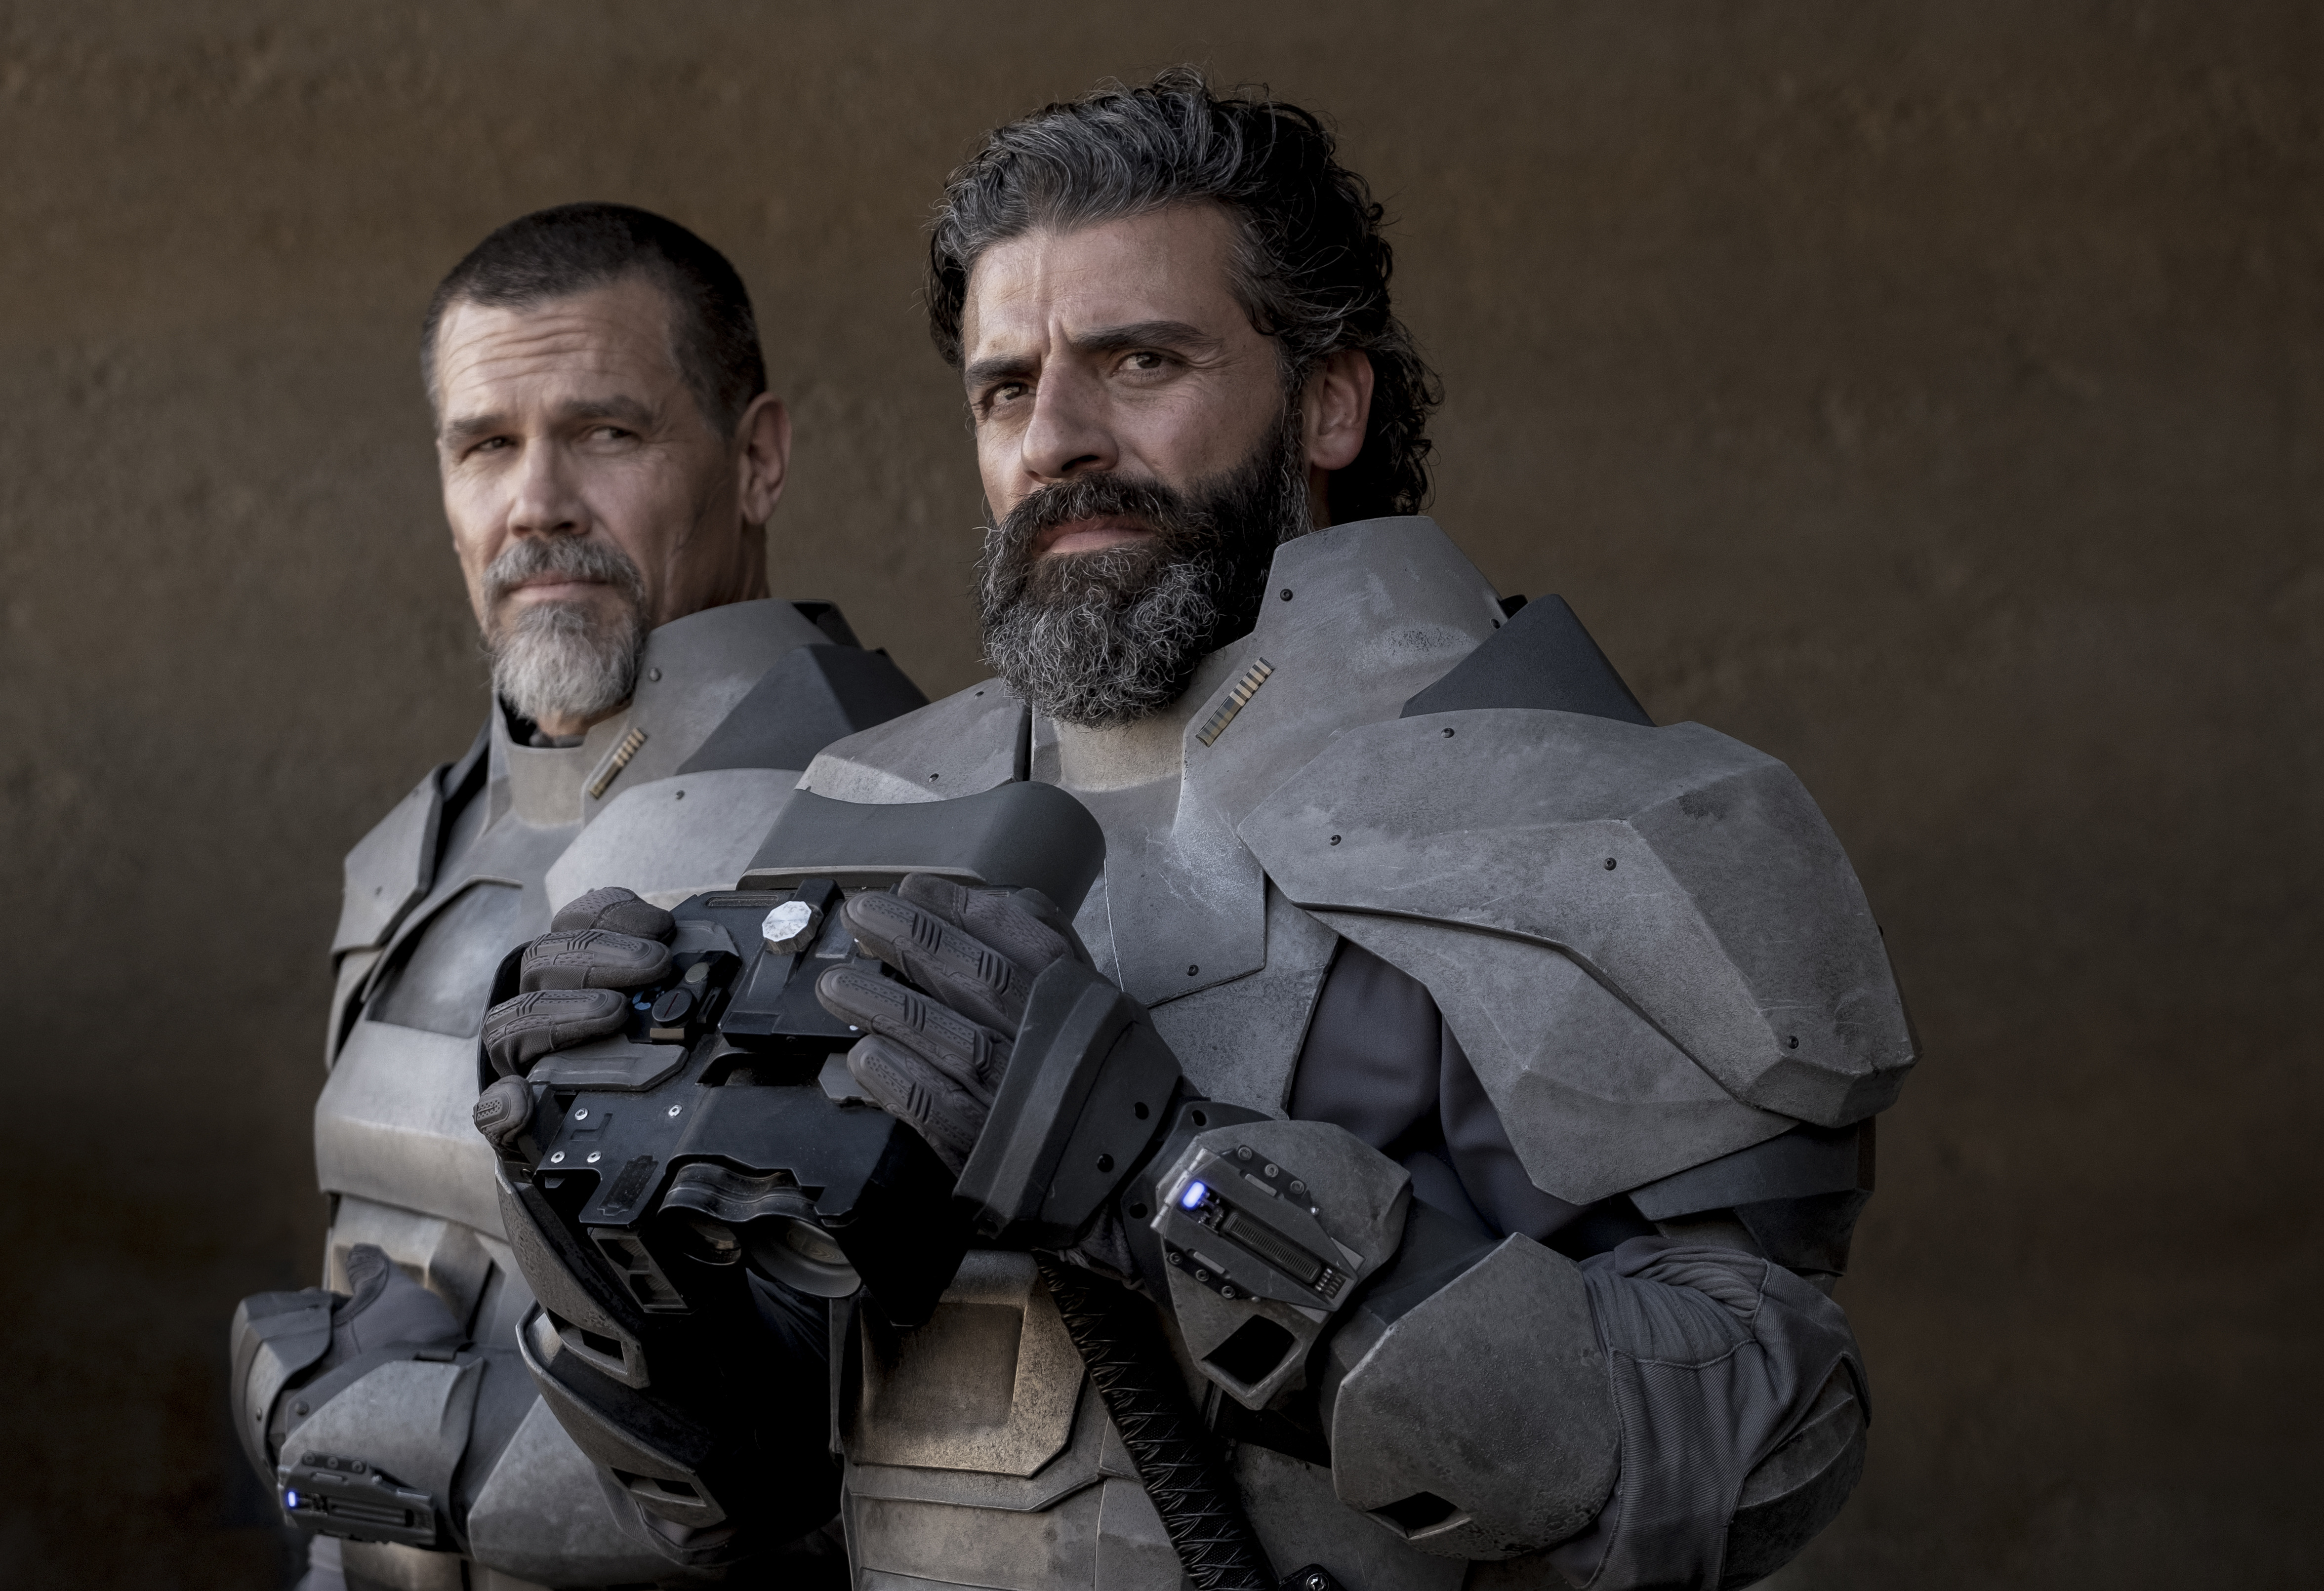 Josh Brolin and Oscar Isaac in 'Dune' (Chiabella James © 2020 Warner Bros. Entertainment Inc. All Rights Reserved.)